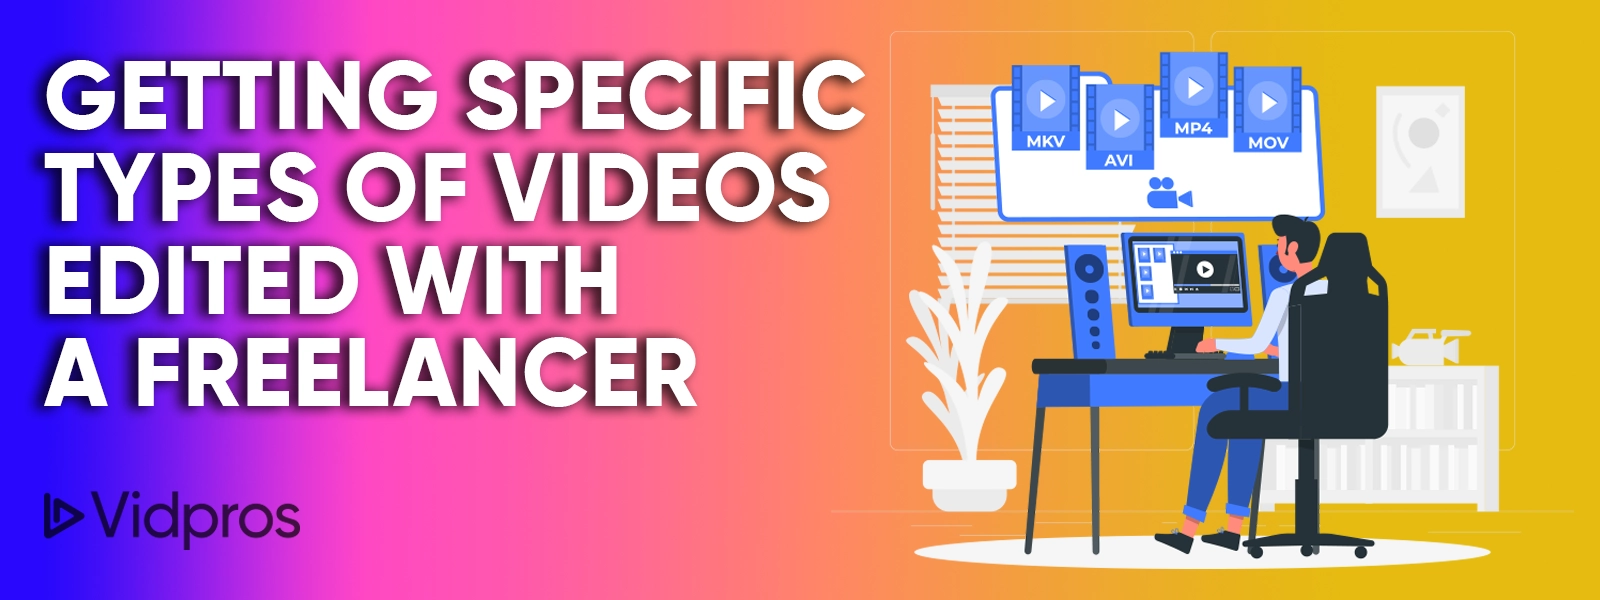 Getting Specific Types Of Videos Edited With A Freelancer